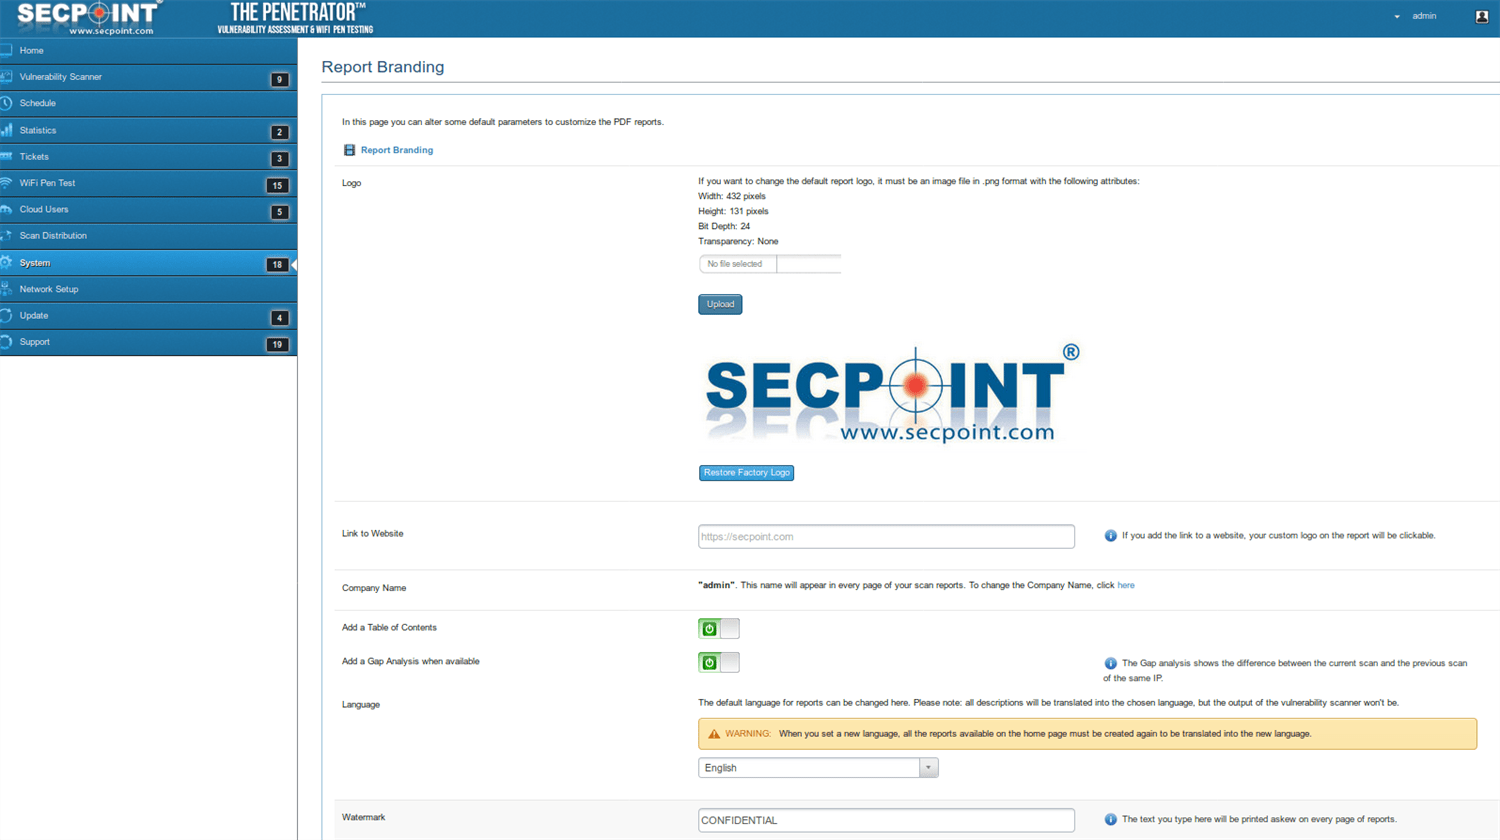 SecPoint Penetrator S9 - 256 IP Concurrent Scan License 1 Year Renewal - SecPoint